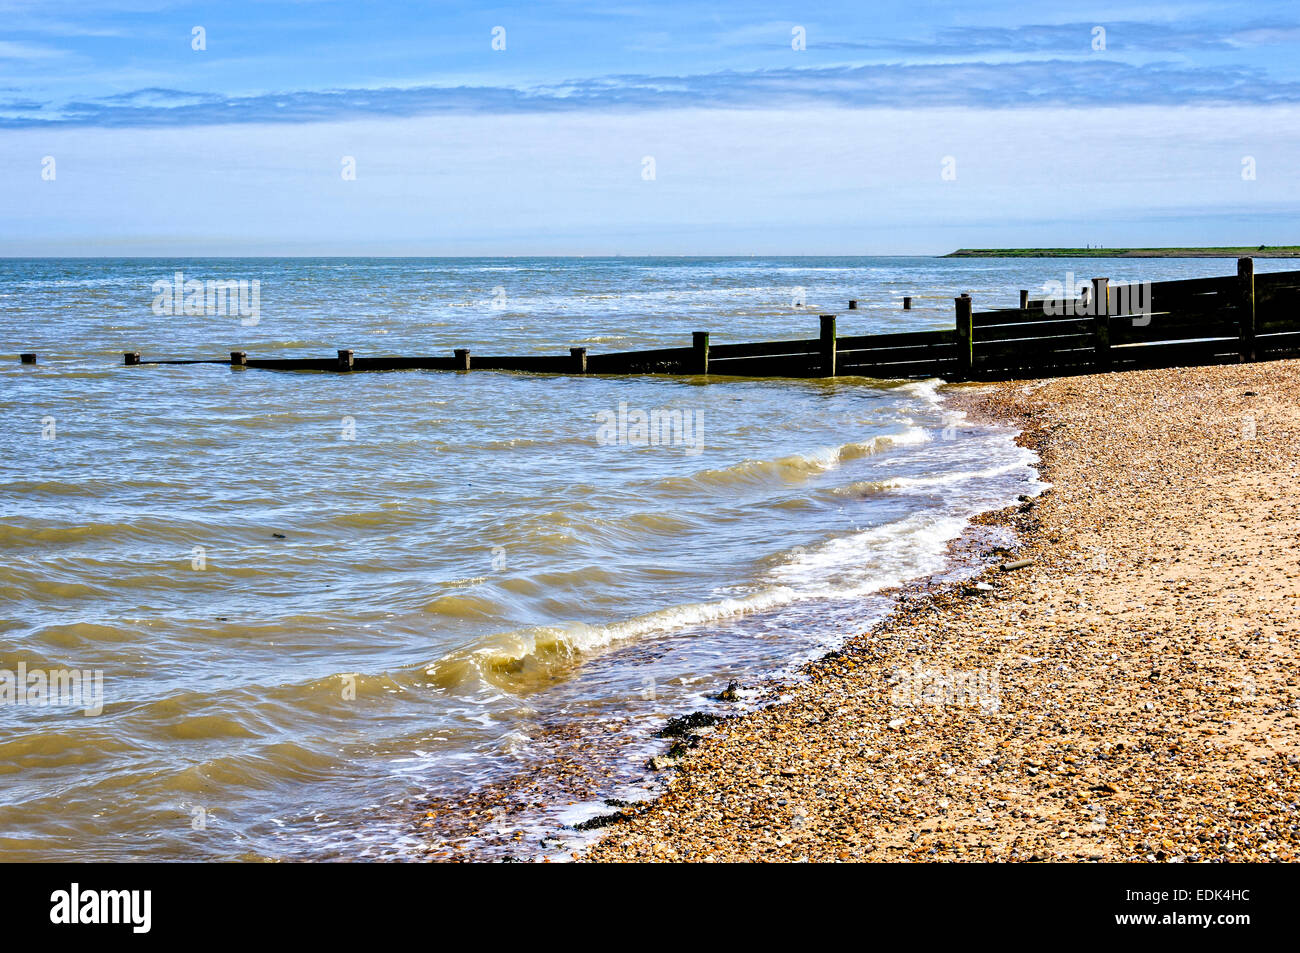 A tranquil River Thames contained by dark wooden breakwaters laps gently onto a shingle beach under a two-tone blue sky Stock Photo